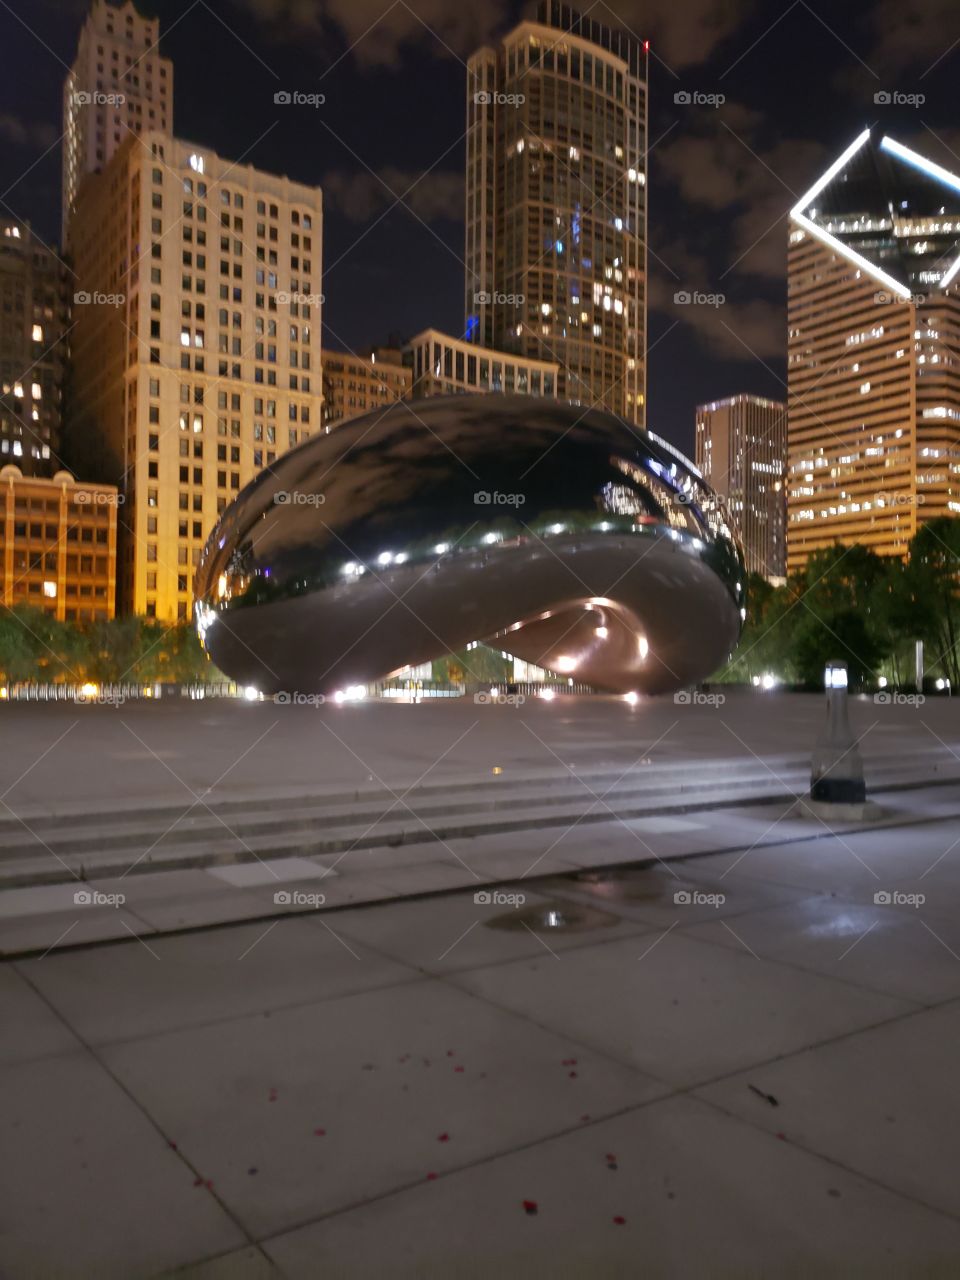 The Big Bean in Chicago